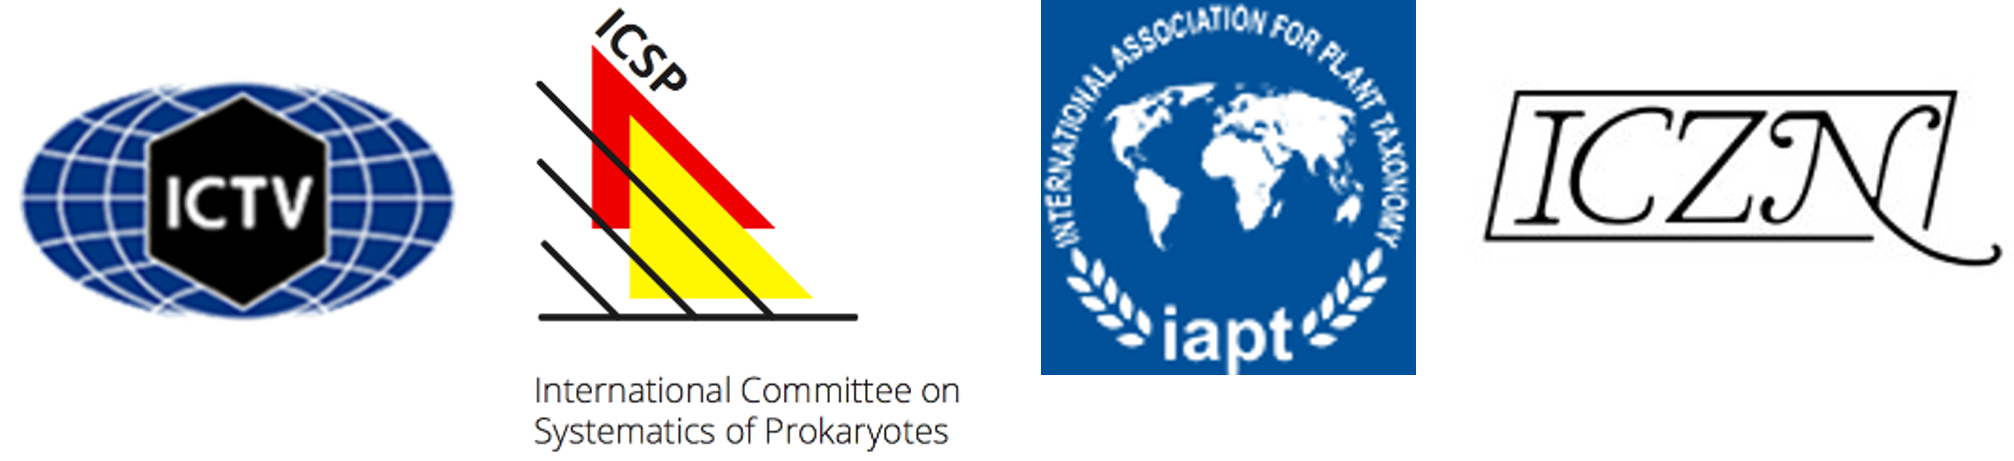 image for logos of the 4 taxonomy groups